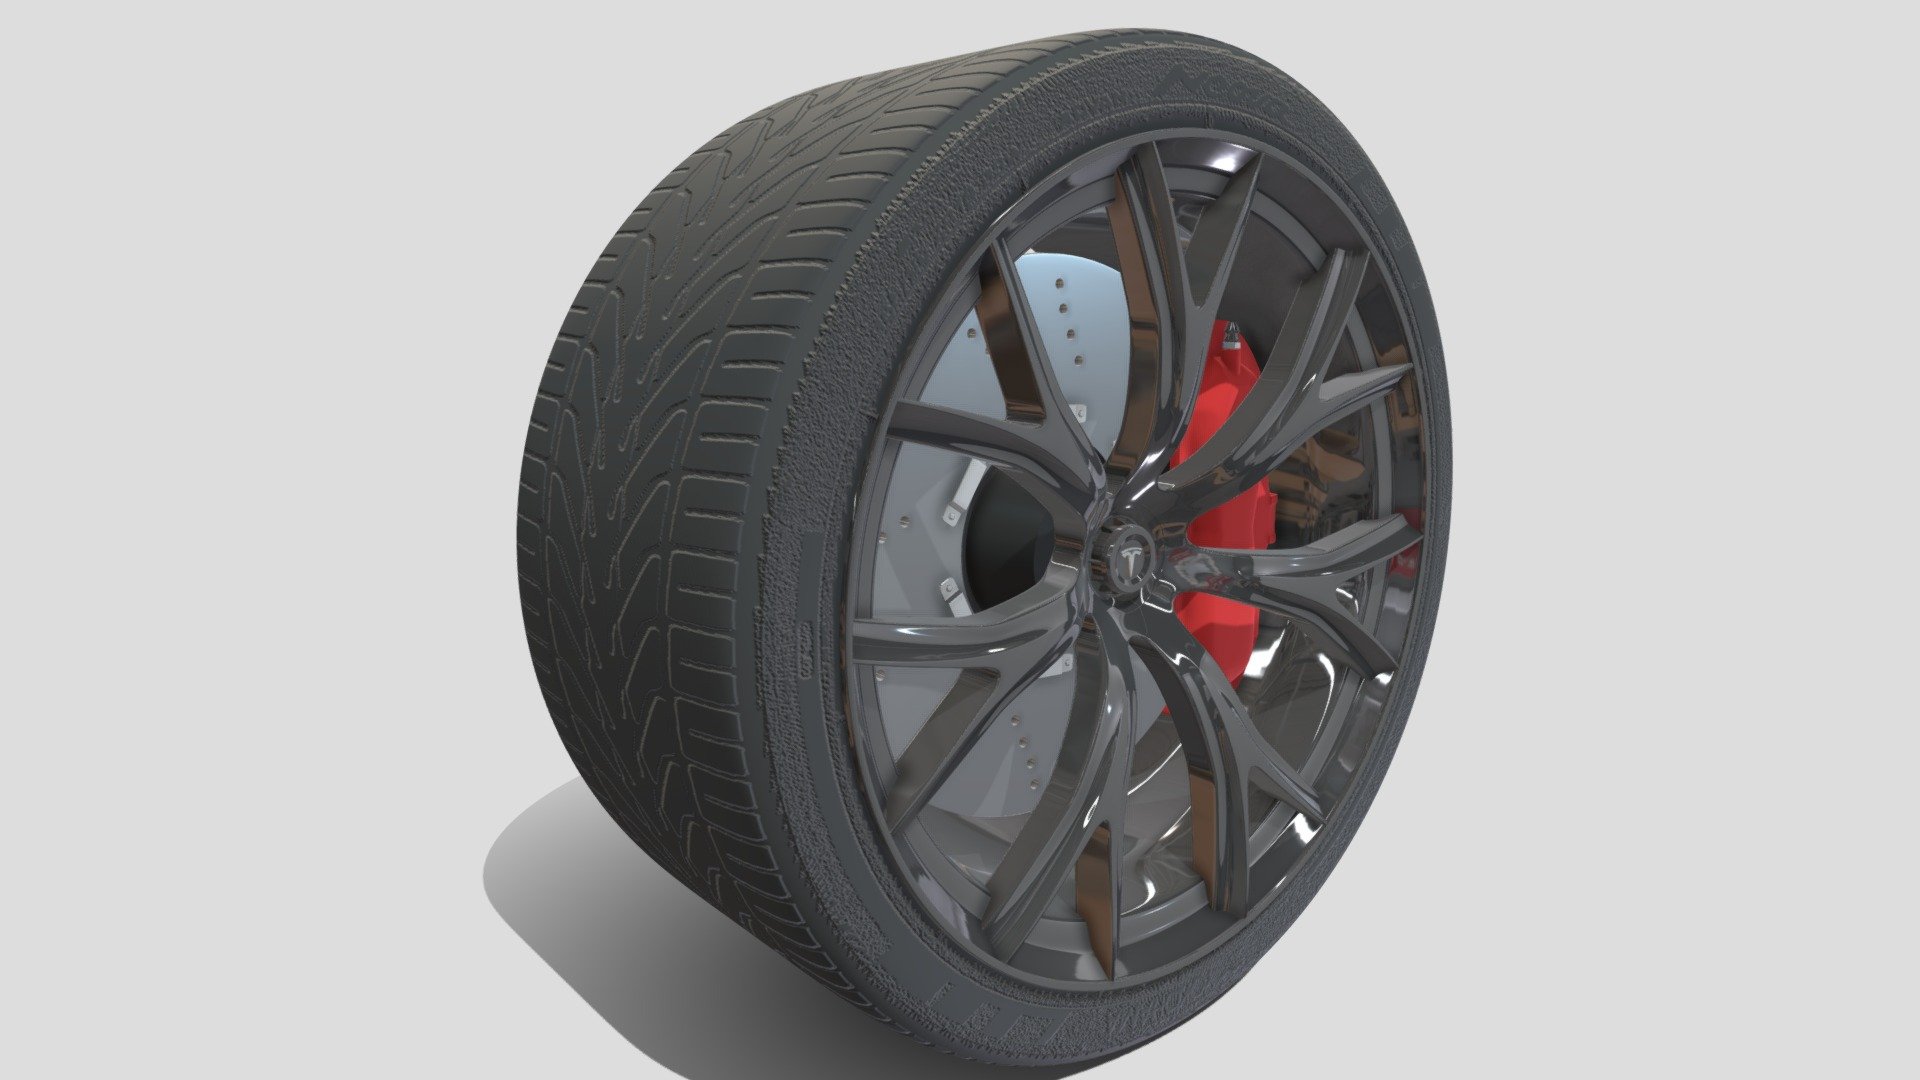 Tesla Roadster Wheel 3D model, with brake disc and caliper.

File formats:
-.blend, rendered with cycles, as seen in the images;
-.obj, with materials applied and textures;
-.dae, with materials applied and textures;
-.fbx, with material slots applied;
-.stl;

3D Software:
This 3d model was originally created in Blender 2.79 and rendered with Cycles.

Materials and textures:
The model has materials applied in all formats, and is ready to import and render.
The model comes with multiple png image textures.

Preview scenes:
The preview images are rendered in Blender using its built-in render engine &lsquo;Cycles'.
Note that the blend files come directly with the rendering scene included and the render command will generate the exact result as seen in previews.
Scene elements are on a different layer from the actual model for easier manipulation of objects.

General:
The model is built strictly out of quads and is subdivisable.
It comes in separate parts, named correctly for the sake of convenience 3d model